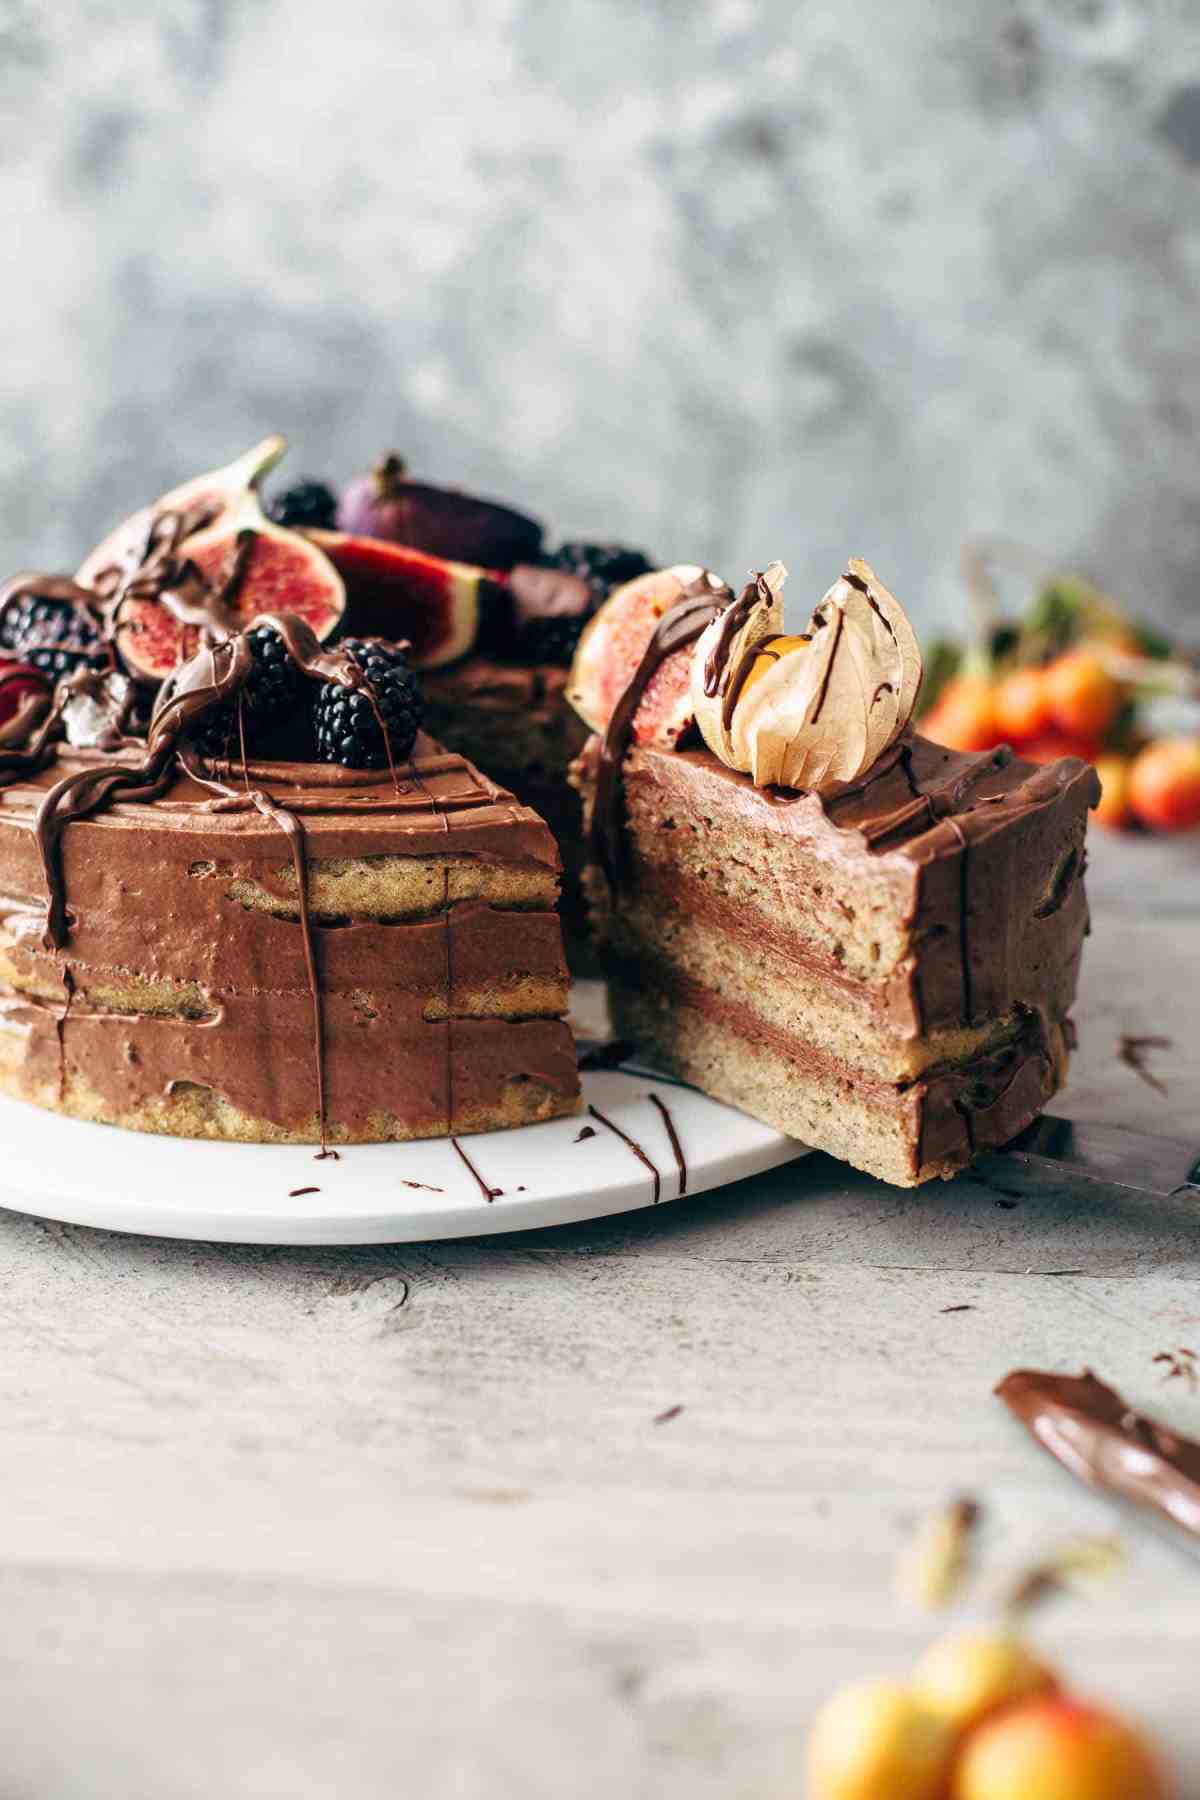 sliced banana layer cake topped with chocolate frosting and fresh fruit on a cake plate